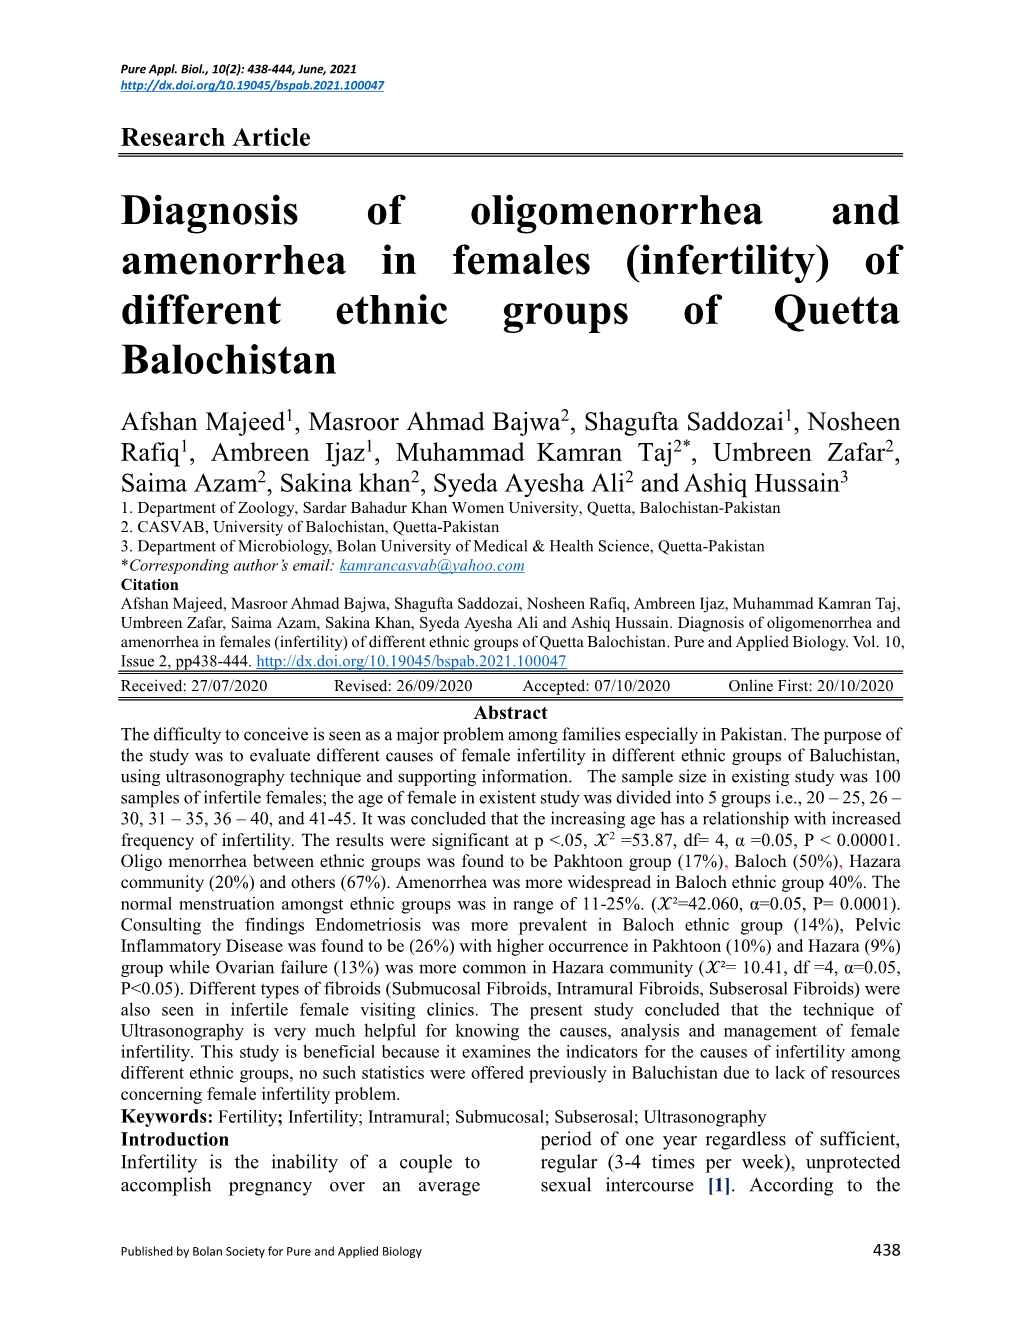 Infertility) of Different Ethnic Groups of Quetta Balochistan